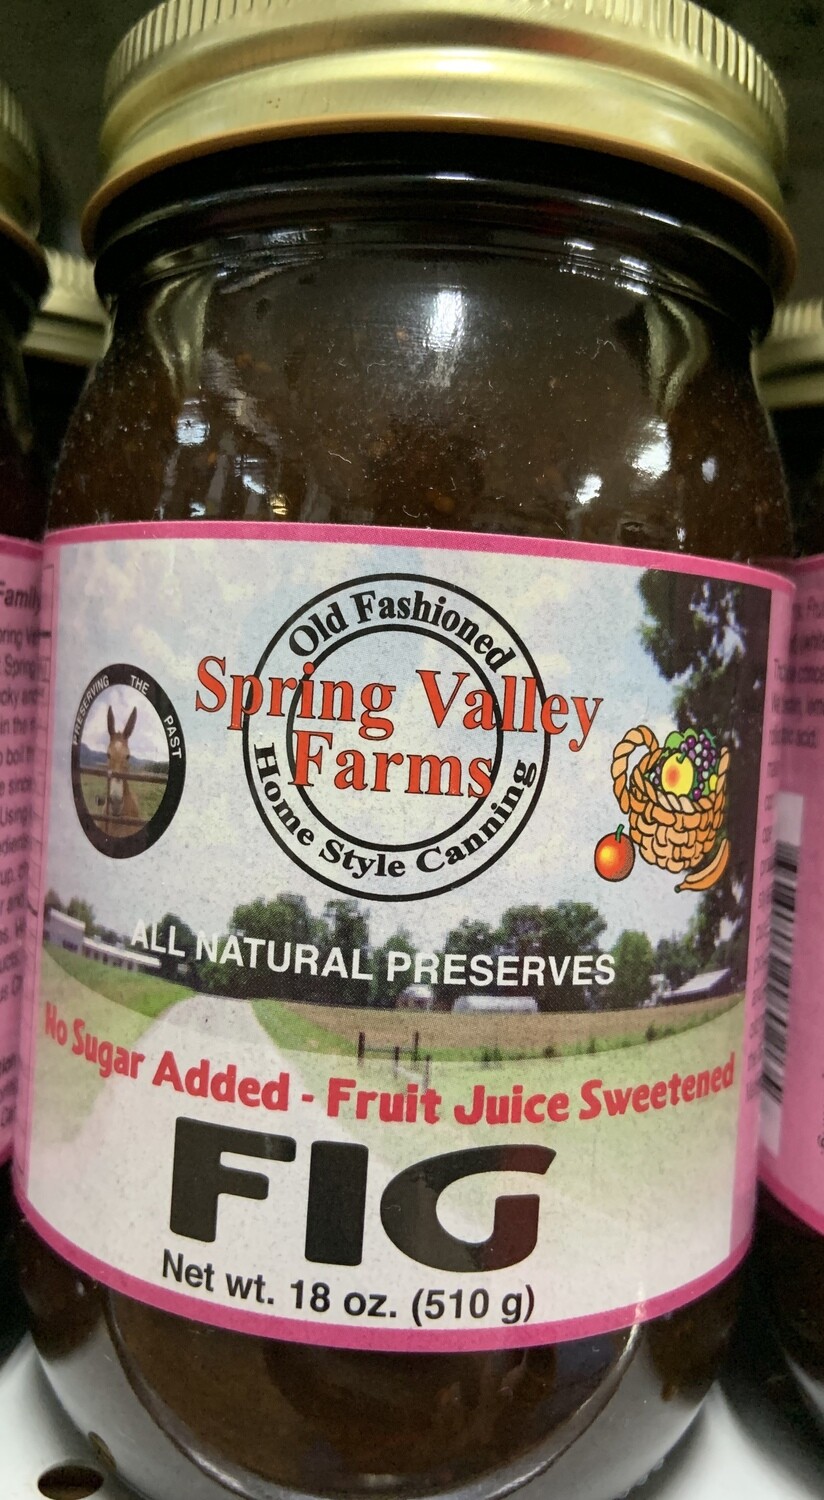 Spring Valley Farms No Sugar Added Fruit Juice Sweetened Fig Jam 19oz